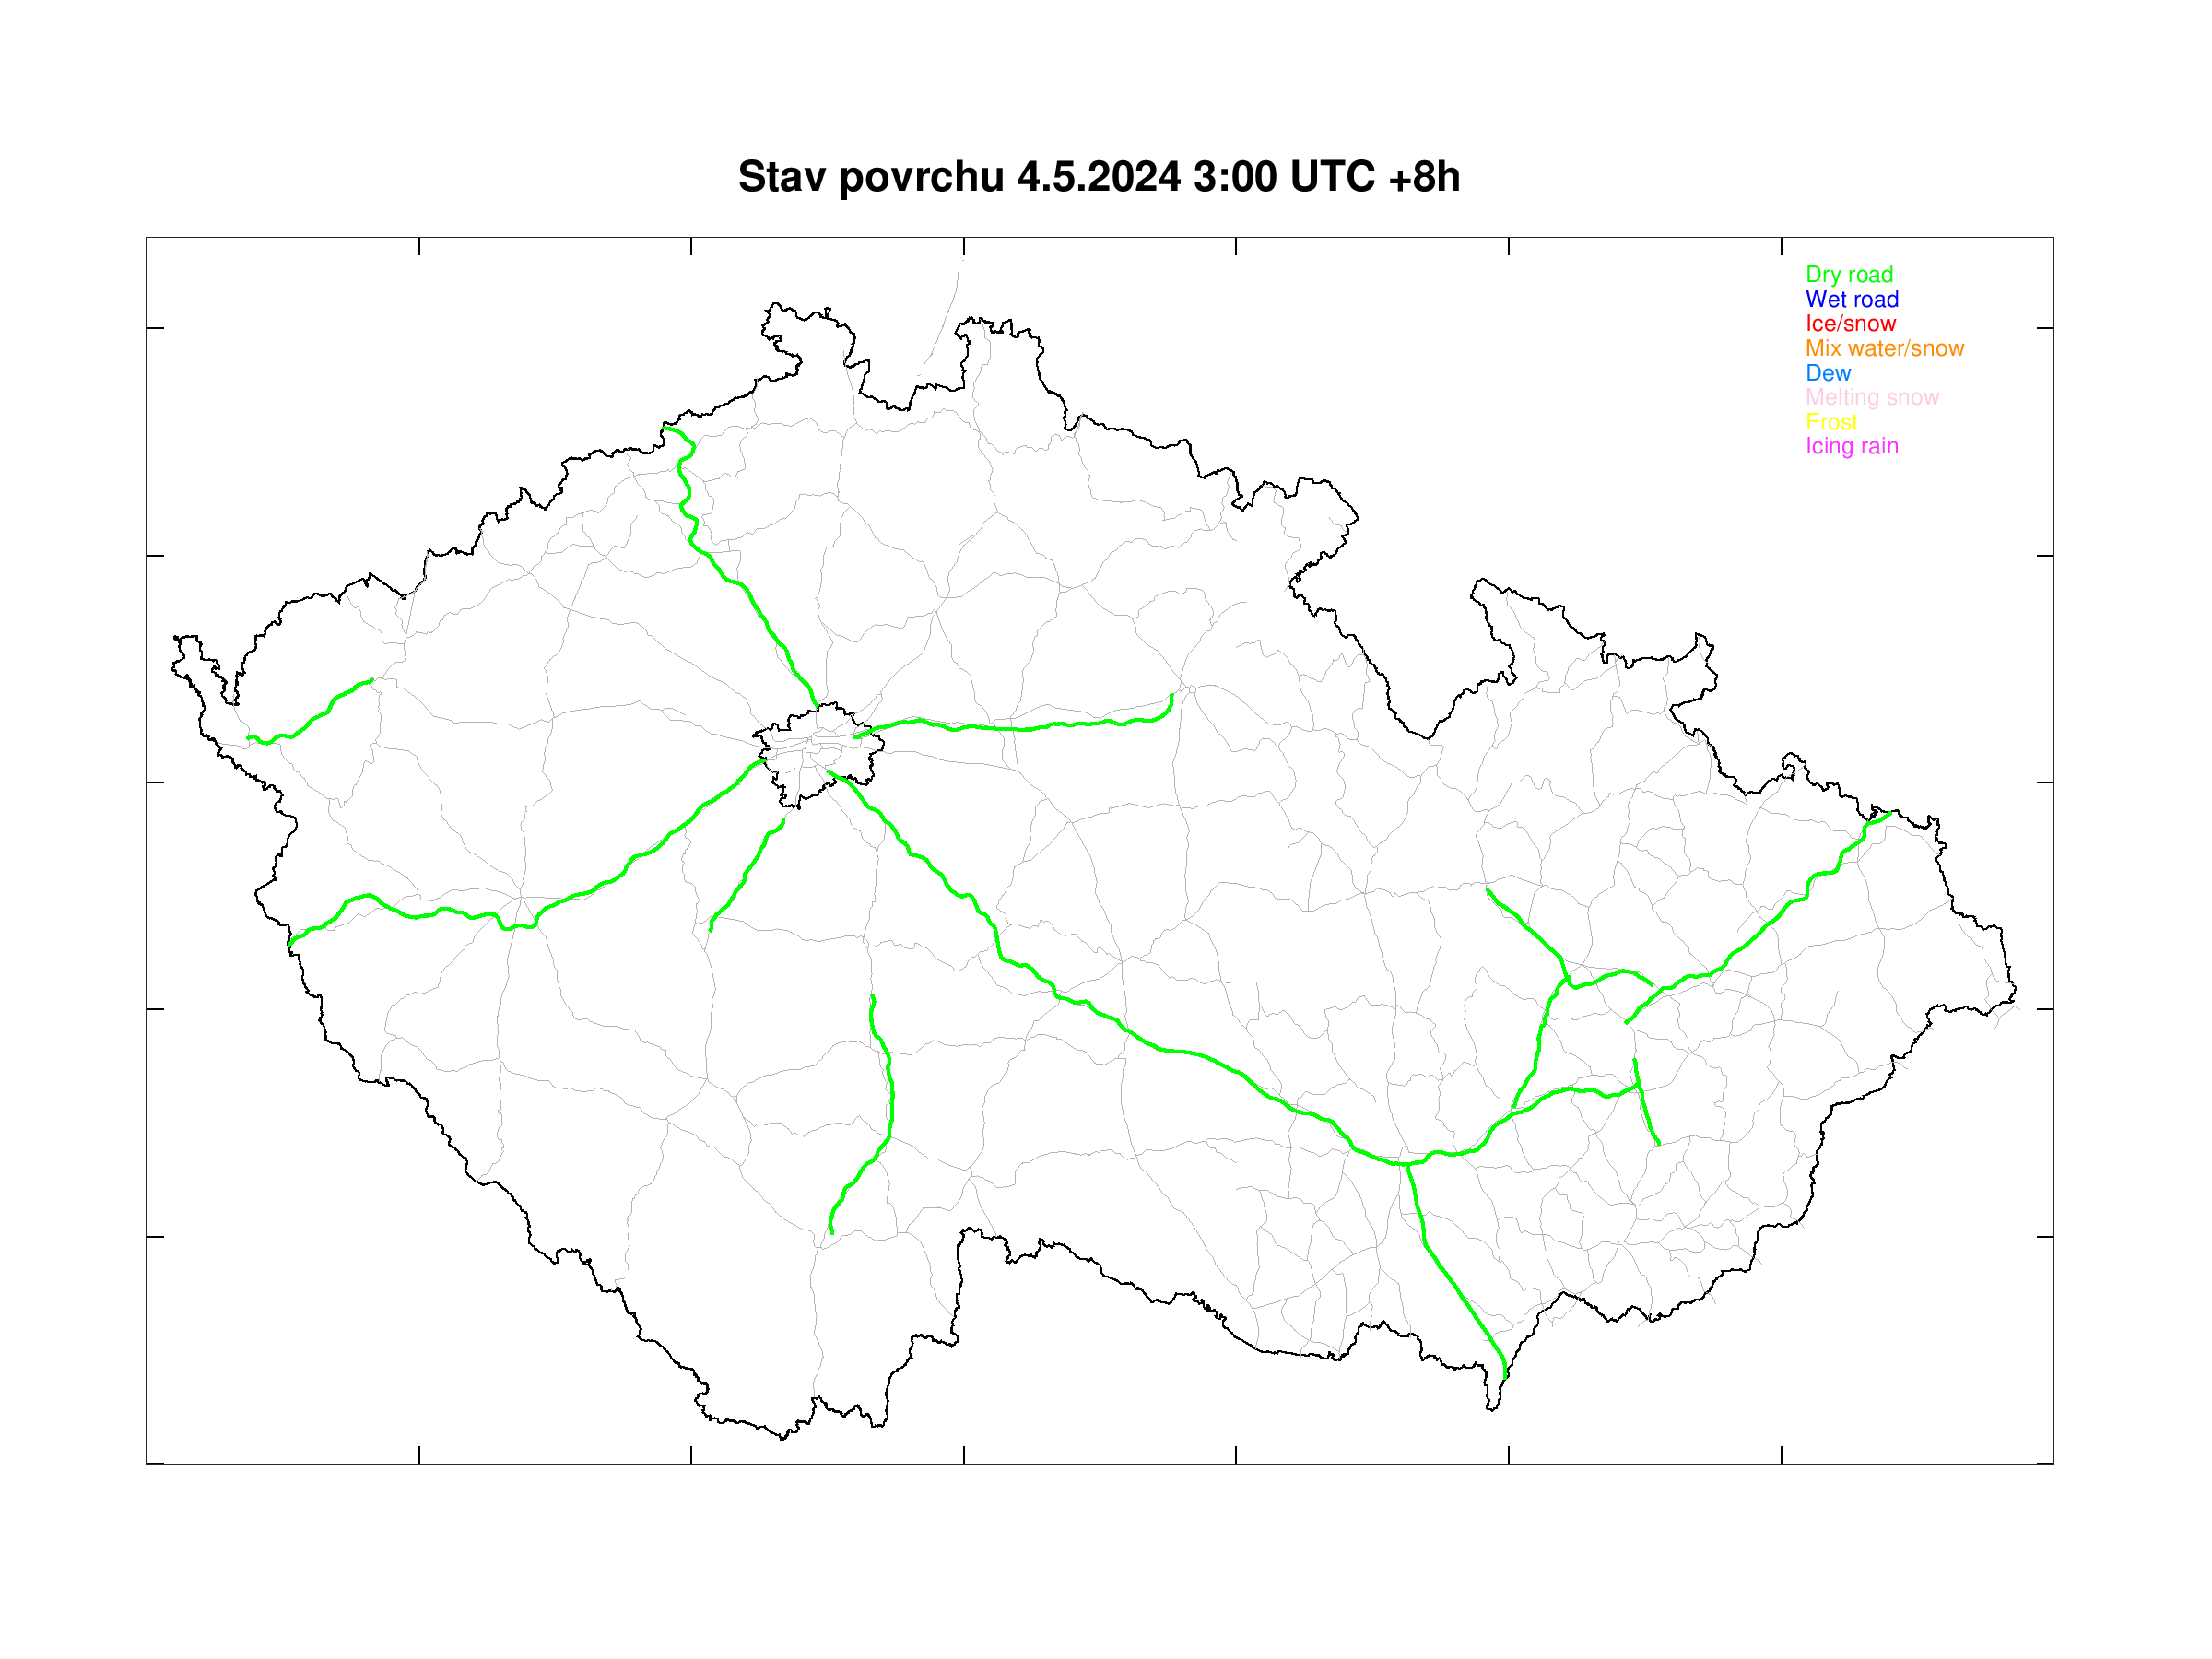 Road surface condition forecast for Czech highways +8h